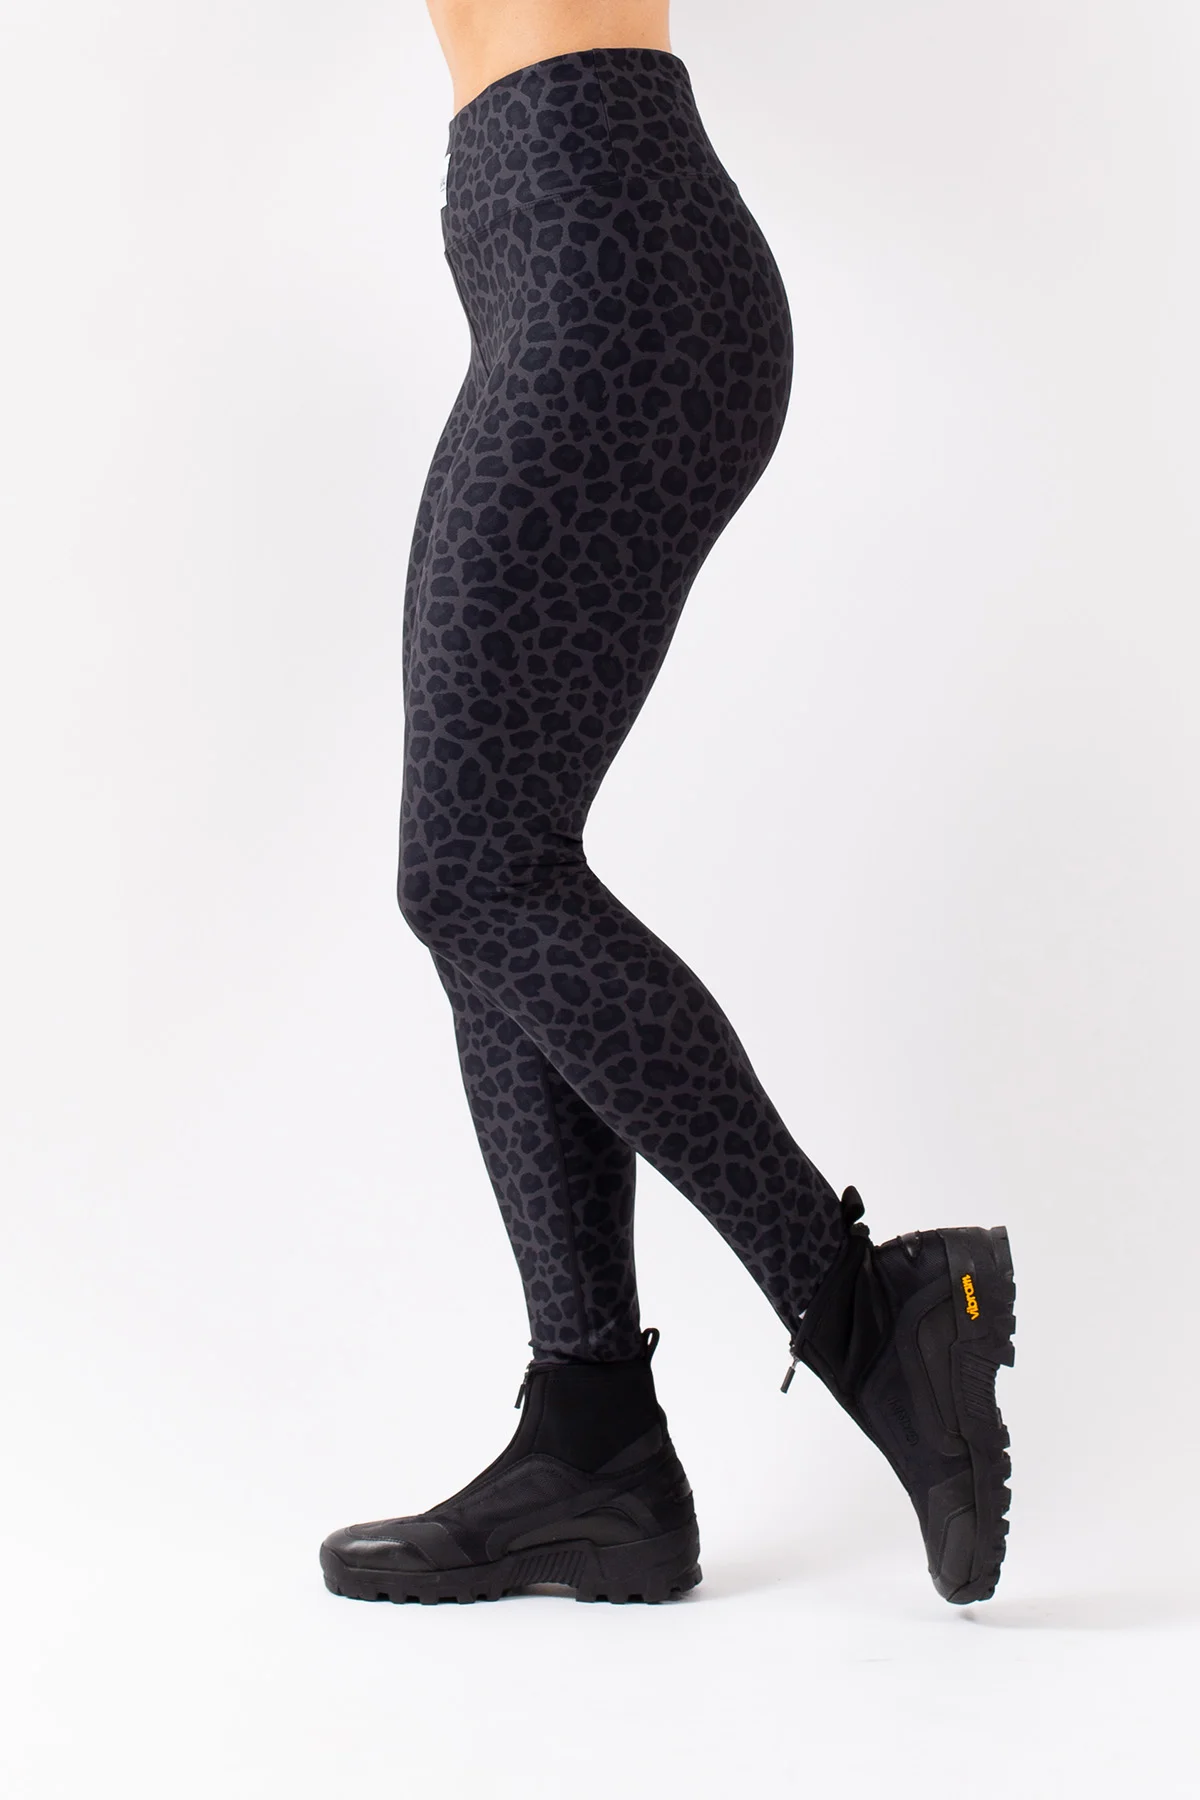 Nike Women's One Luxe Tight Fit Mid Rise Cheetah Print Leggings